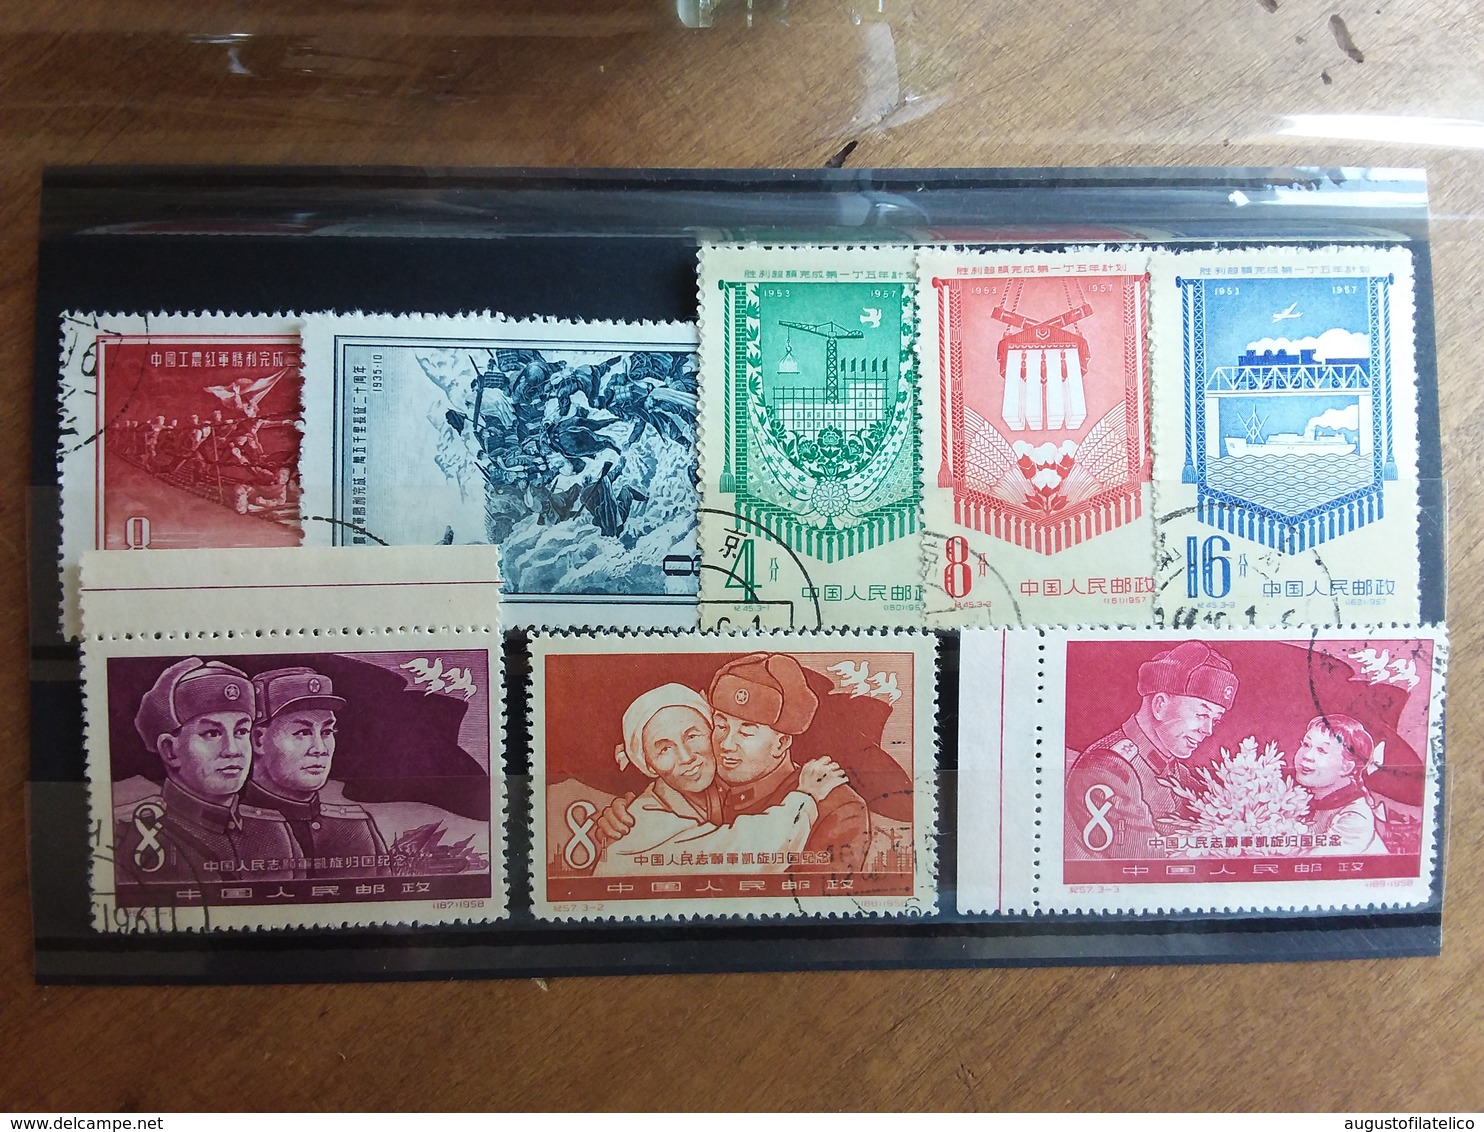 CINA Anni '50 - 3 Serie Complete Timbrate + Spese Postali - Usados